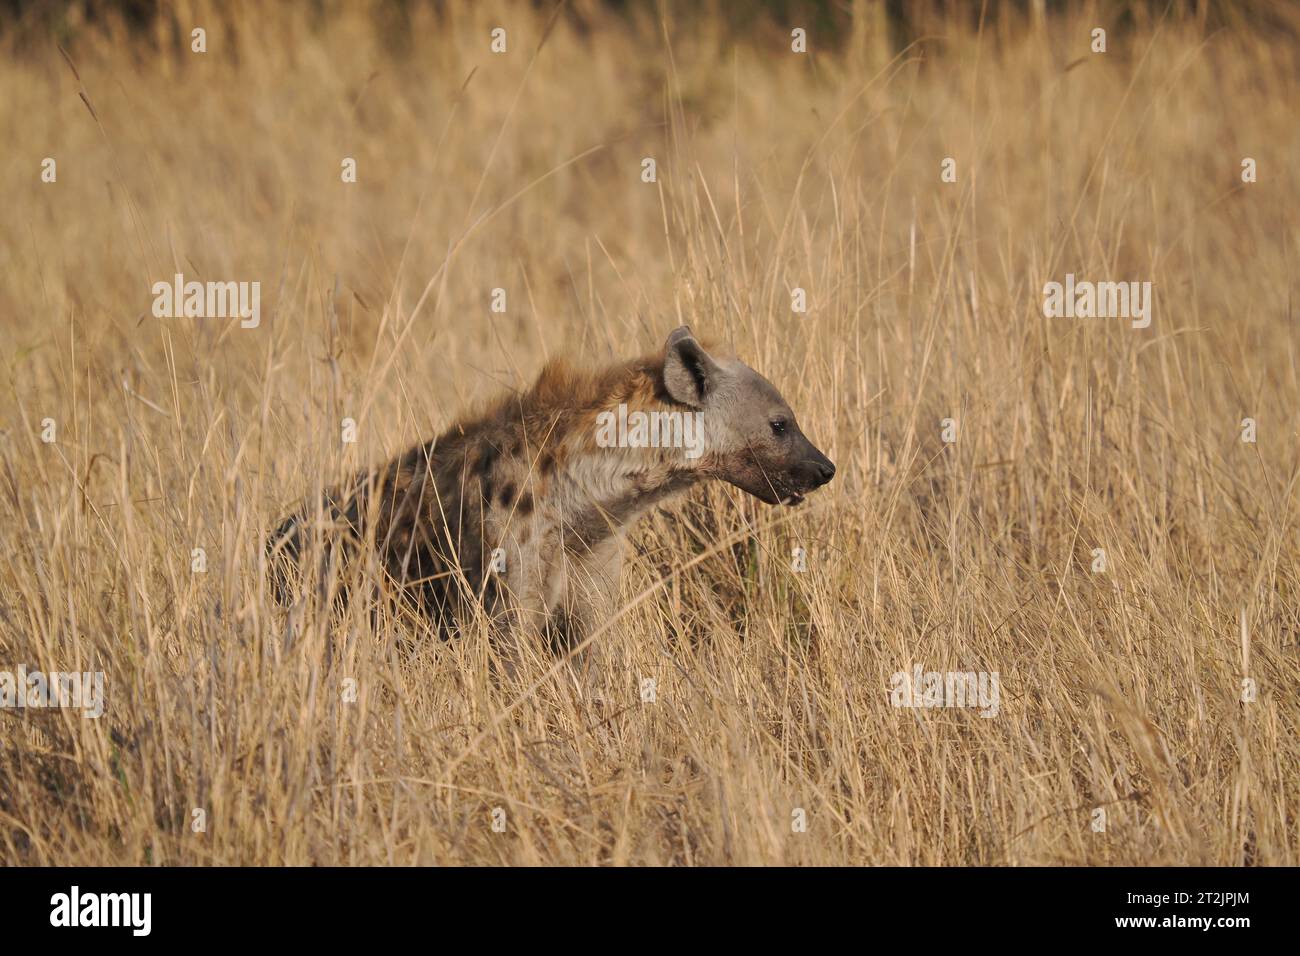 This spotted hyena had found some carrion it was eating, but was frequently observing its environment for danger. Stock Photo